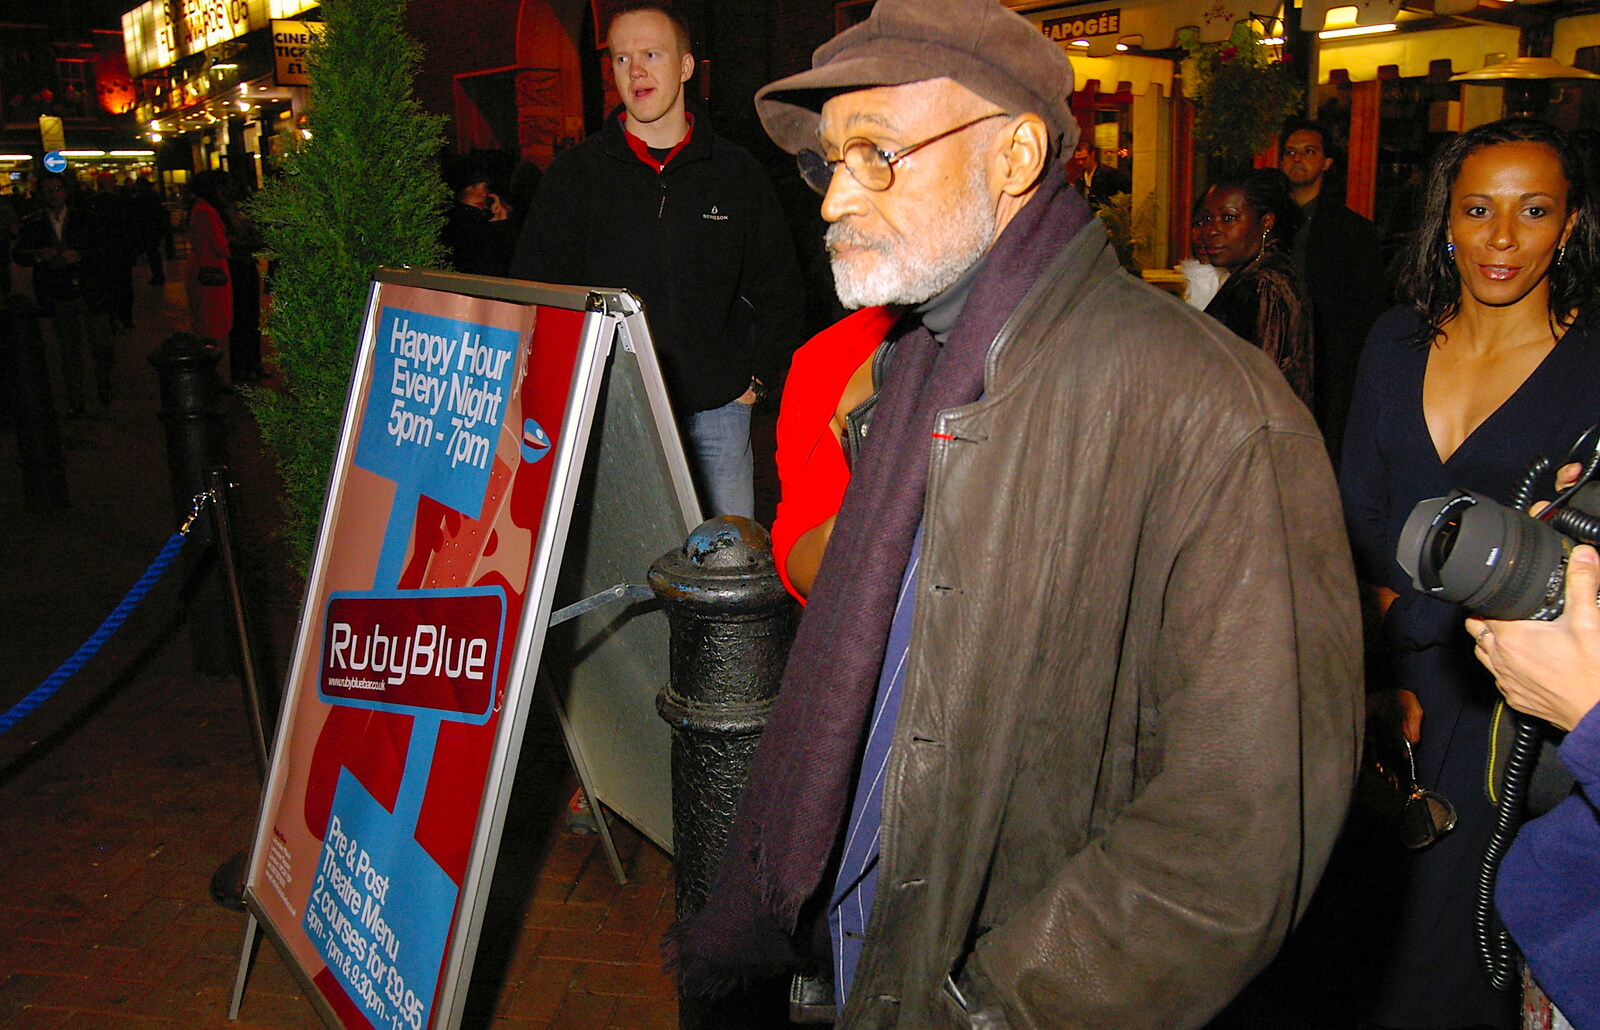 Melvin Van Peebles looks unimpressed from Celebrity Snappers: Becoming a Papparazzo, Leicester Square, London - 9th November 2005